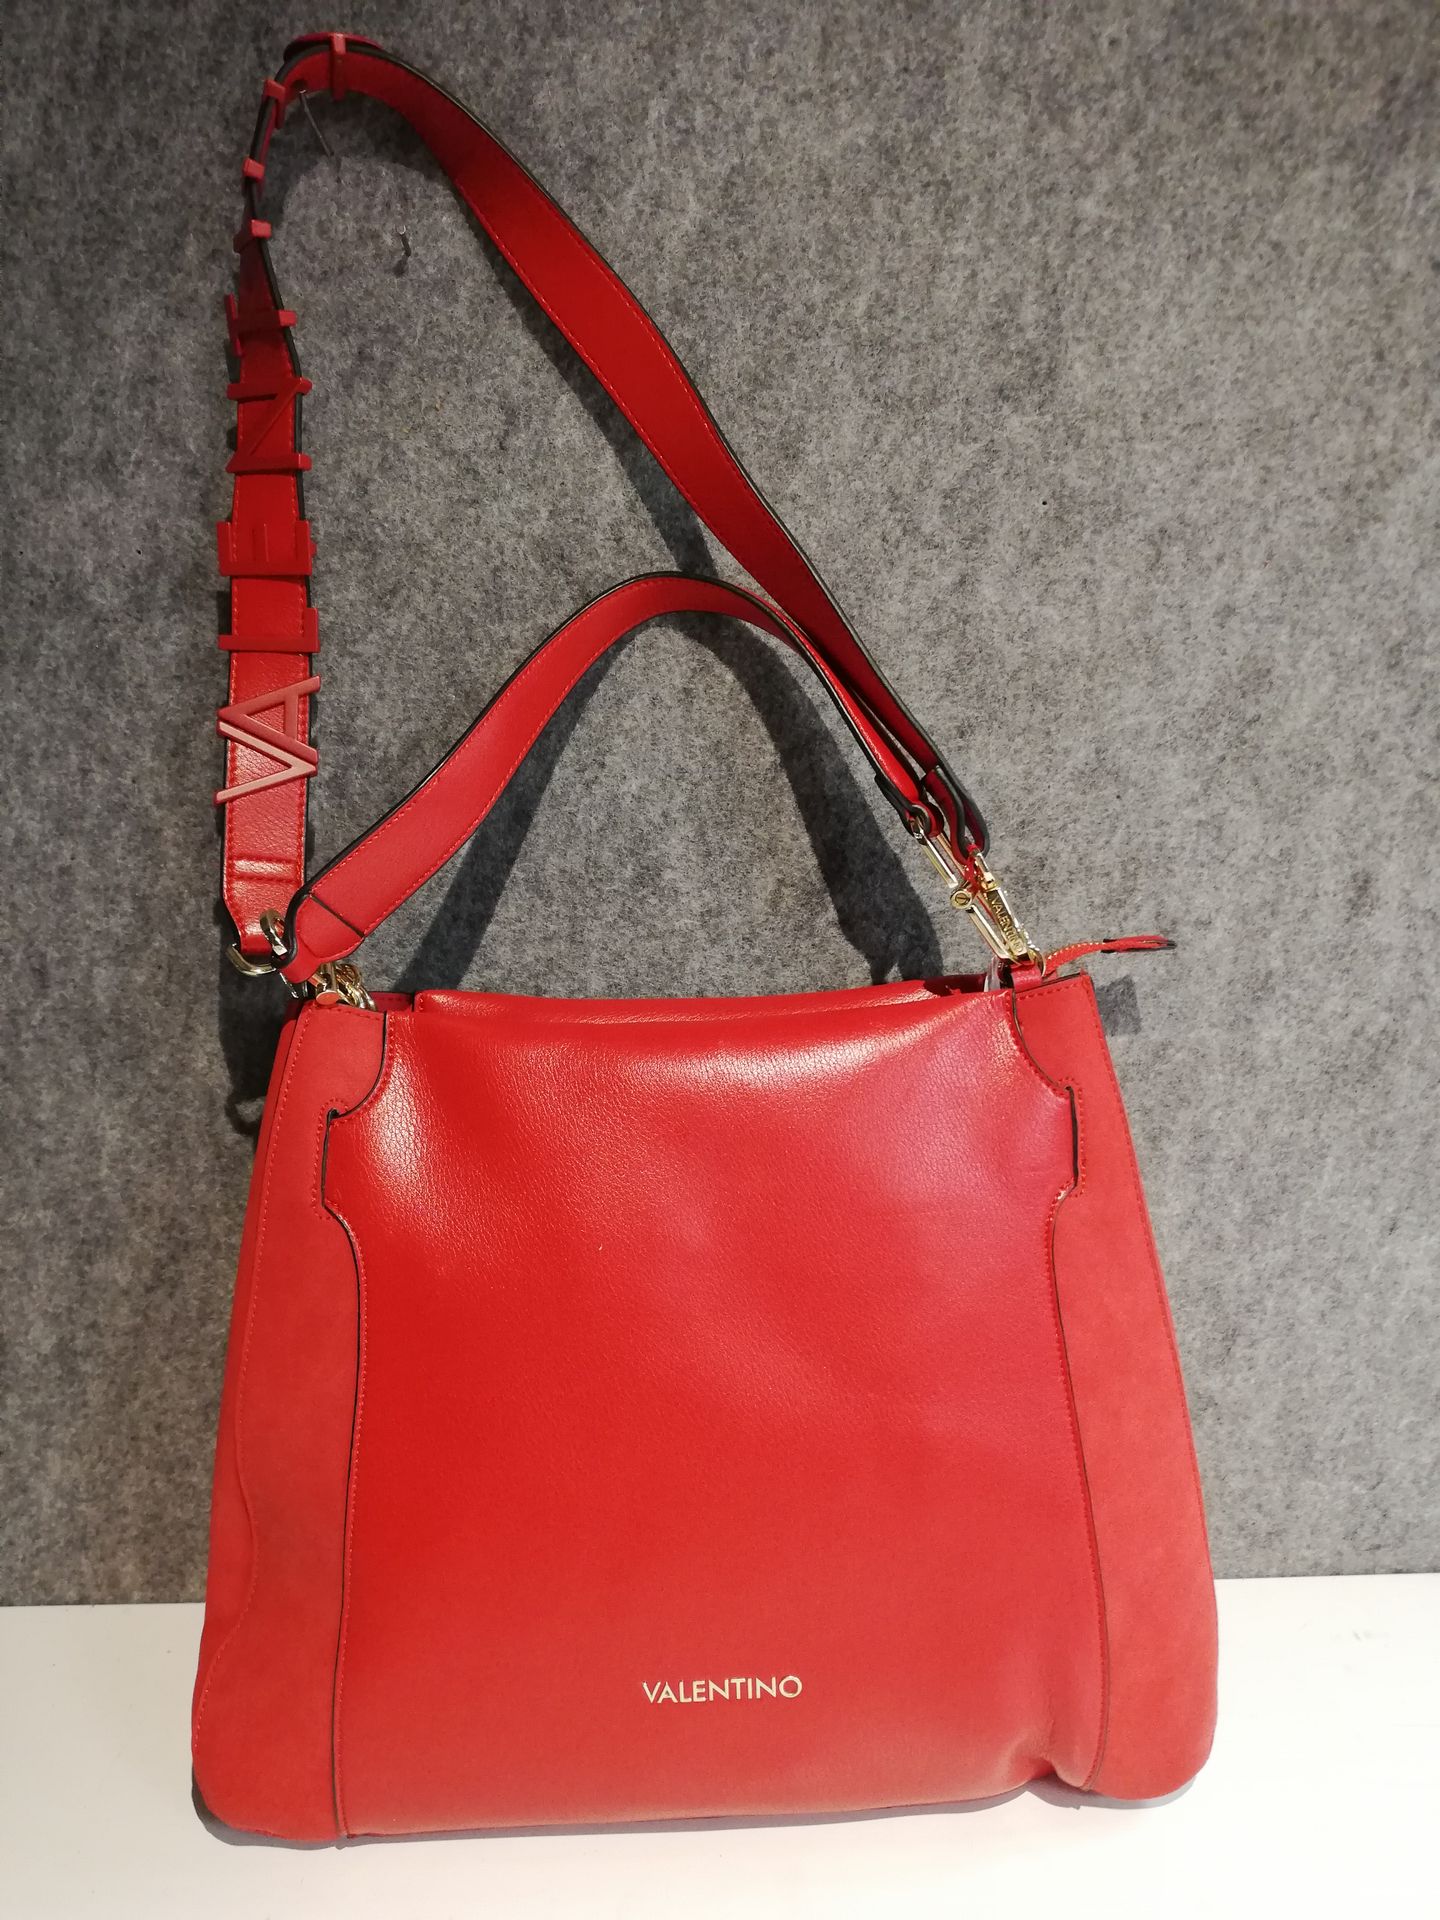 Null VALENTINO, red leather shoulder bag. 29x37cm. Near new condition.